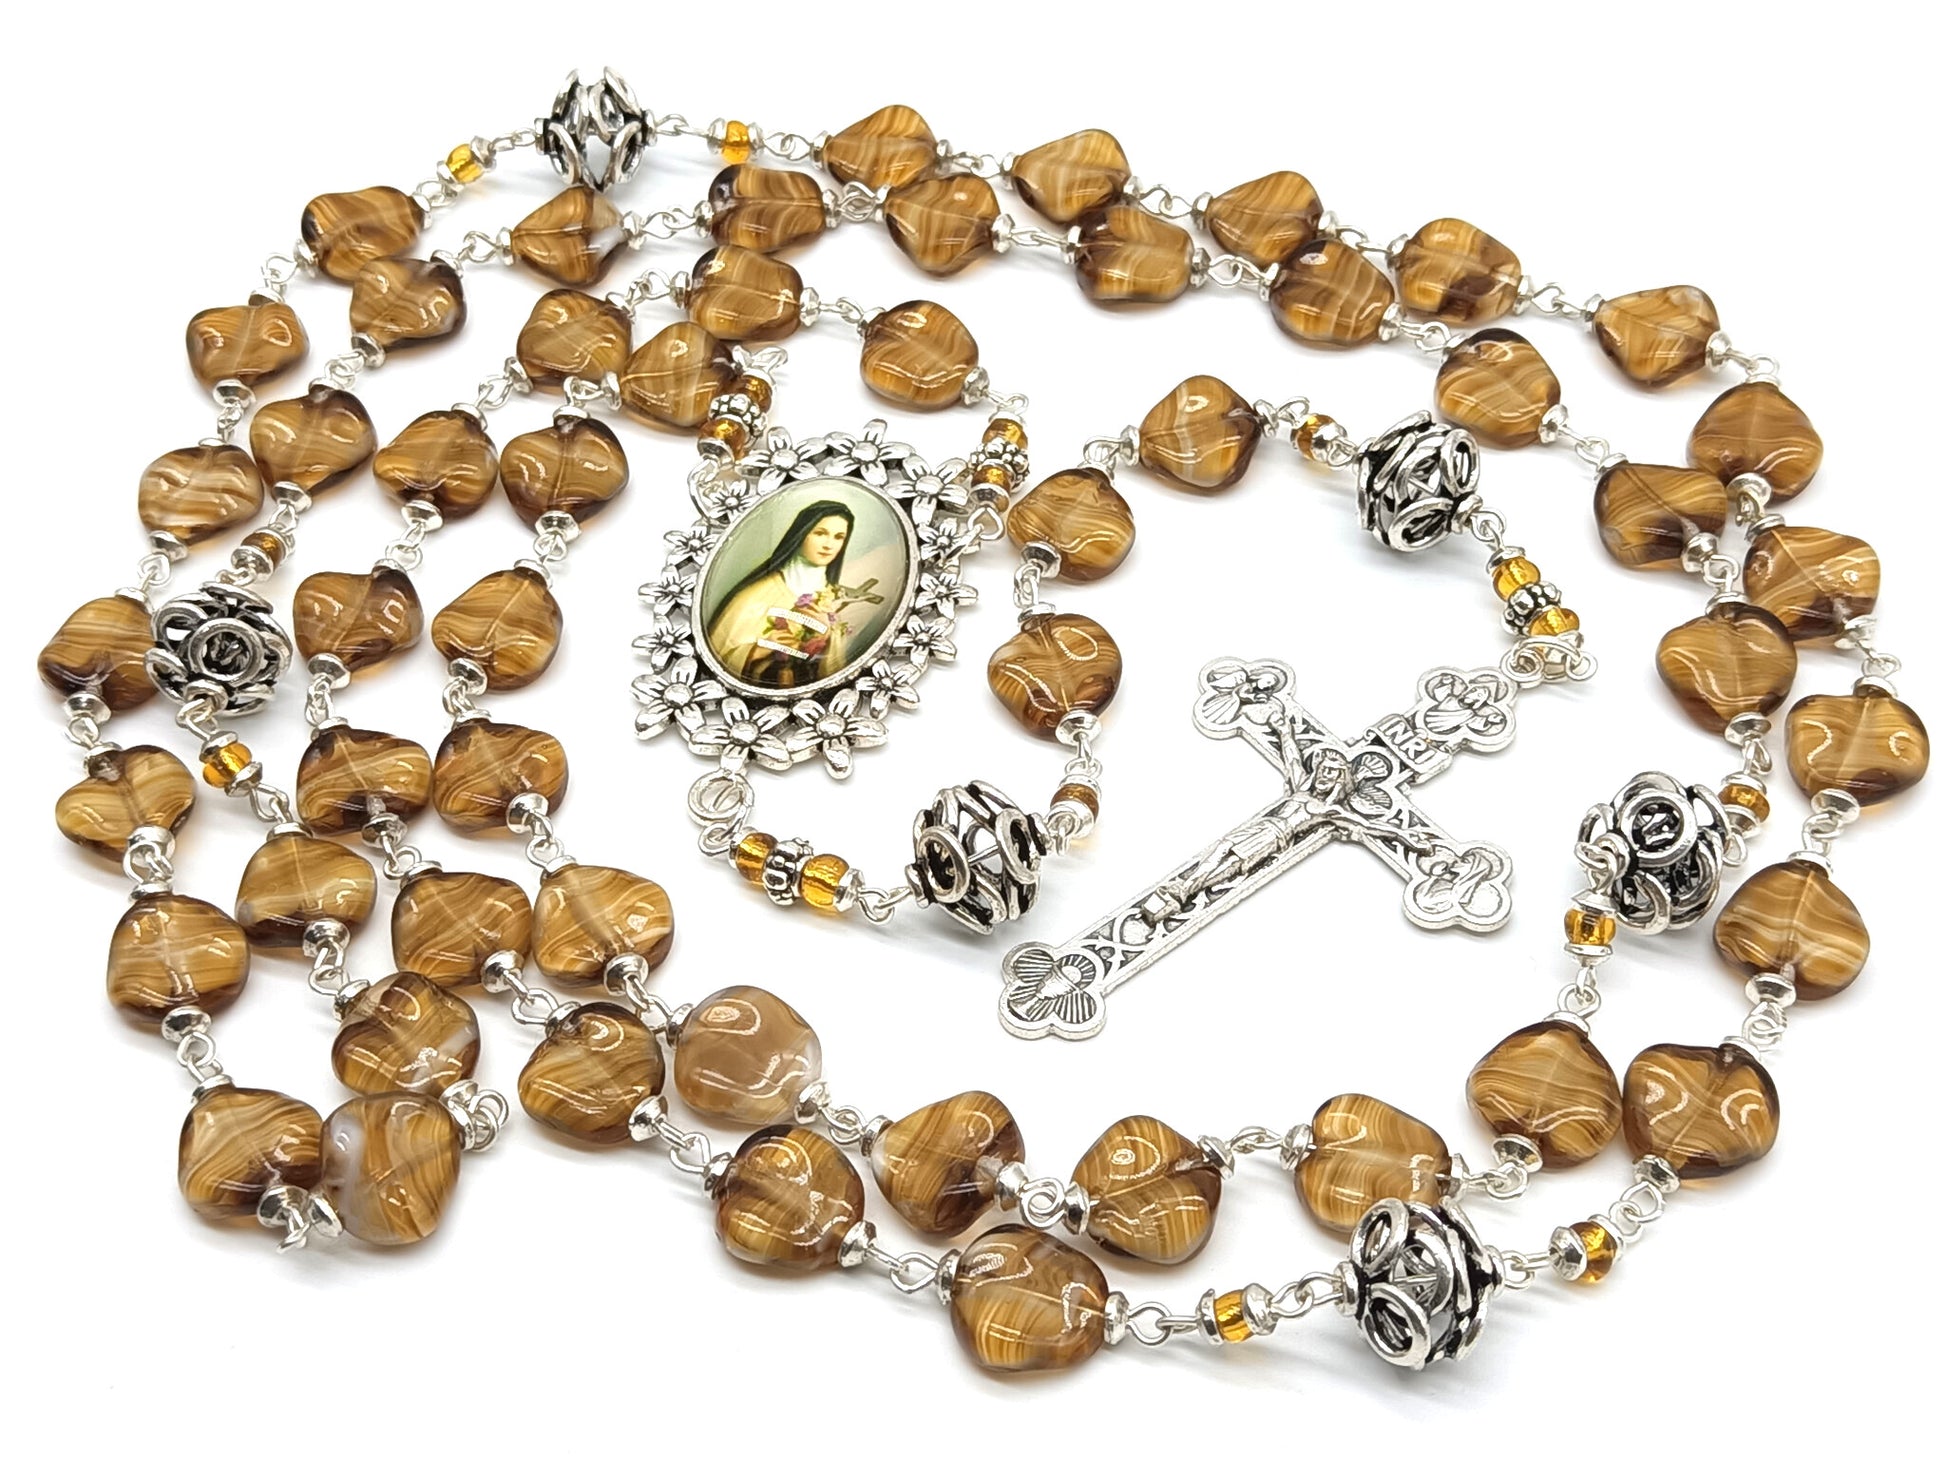 Saint Teresa Rosary beads with coffee glass and silver beads.